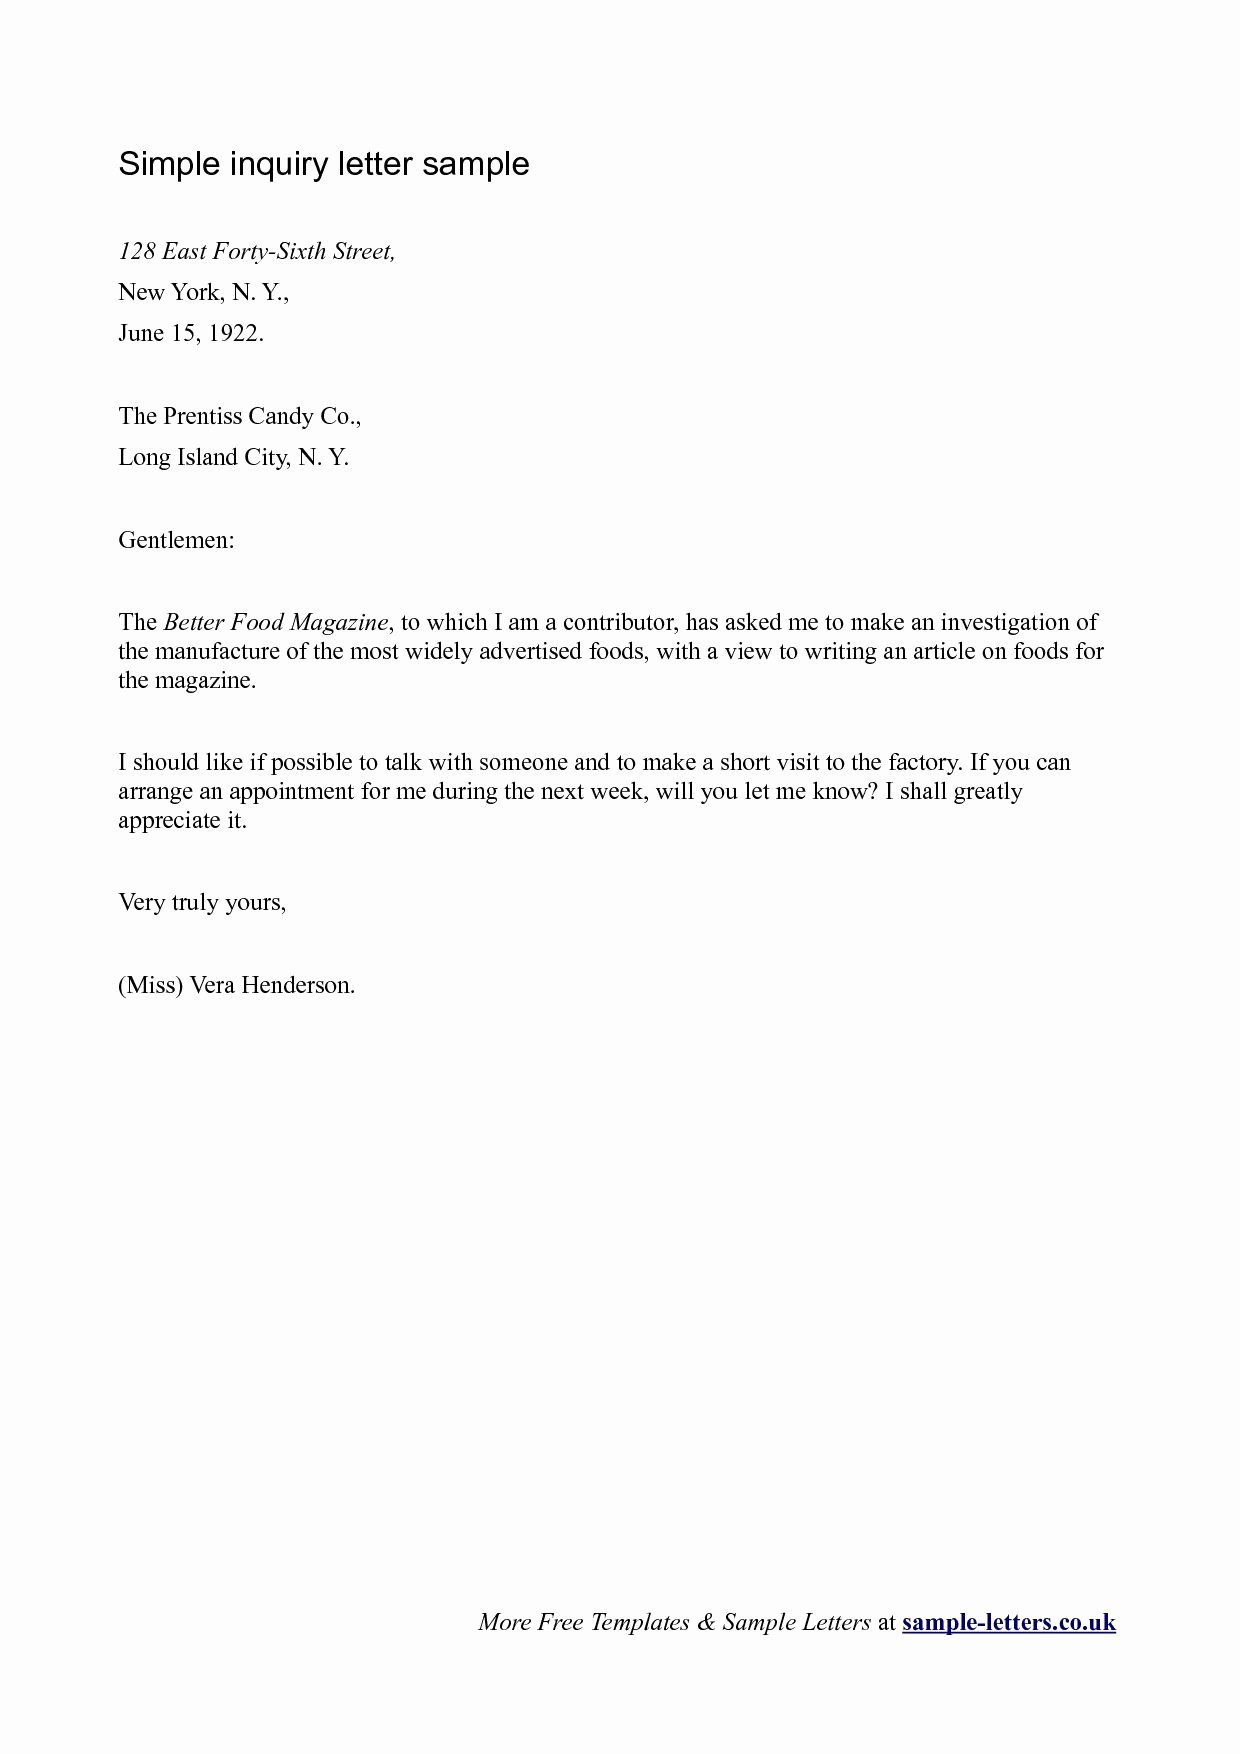 Free Business Letter Template Lovely Business Letter Of Inquiry Sample the Letter Sample